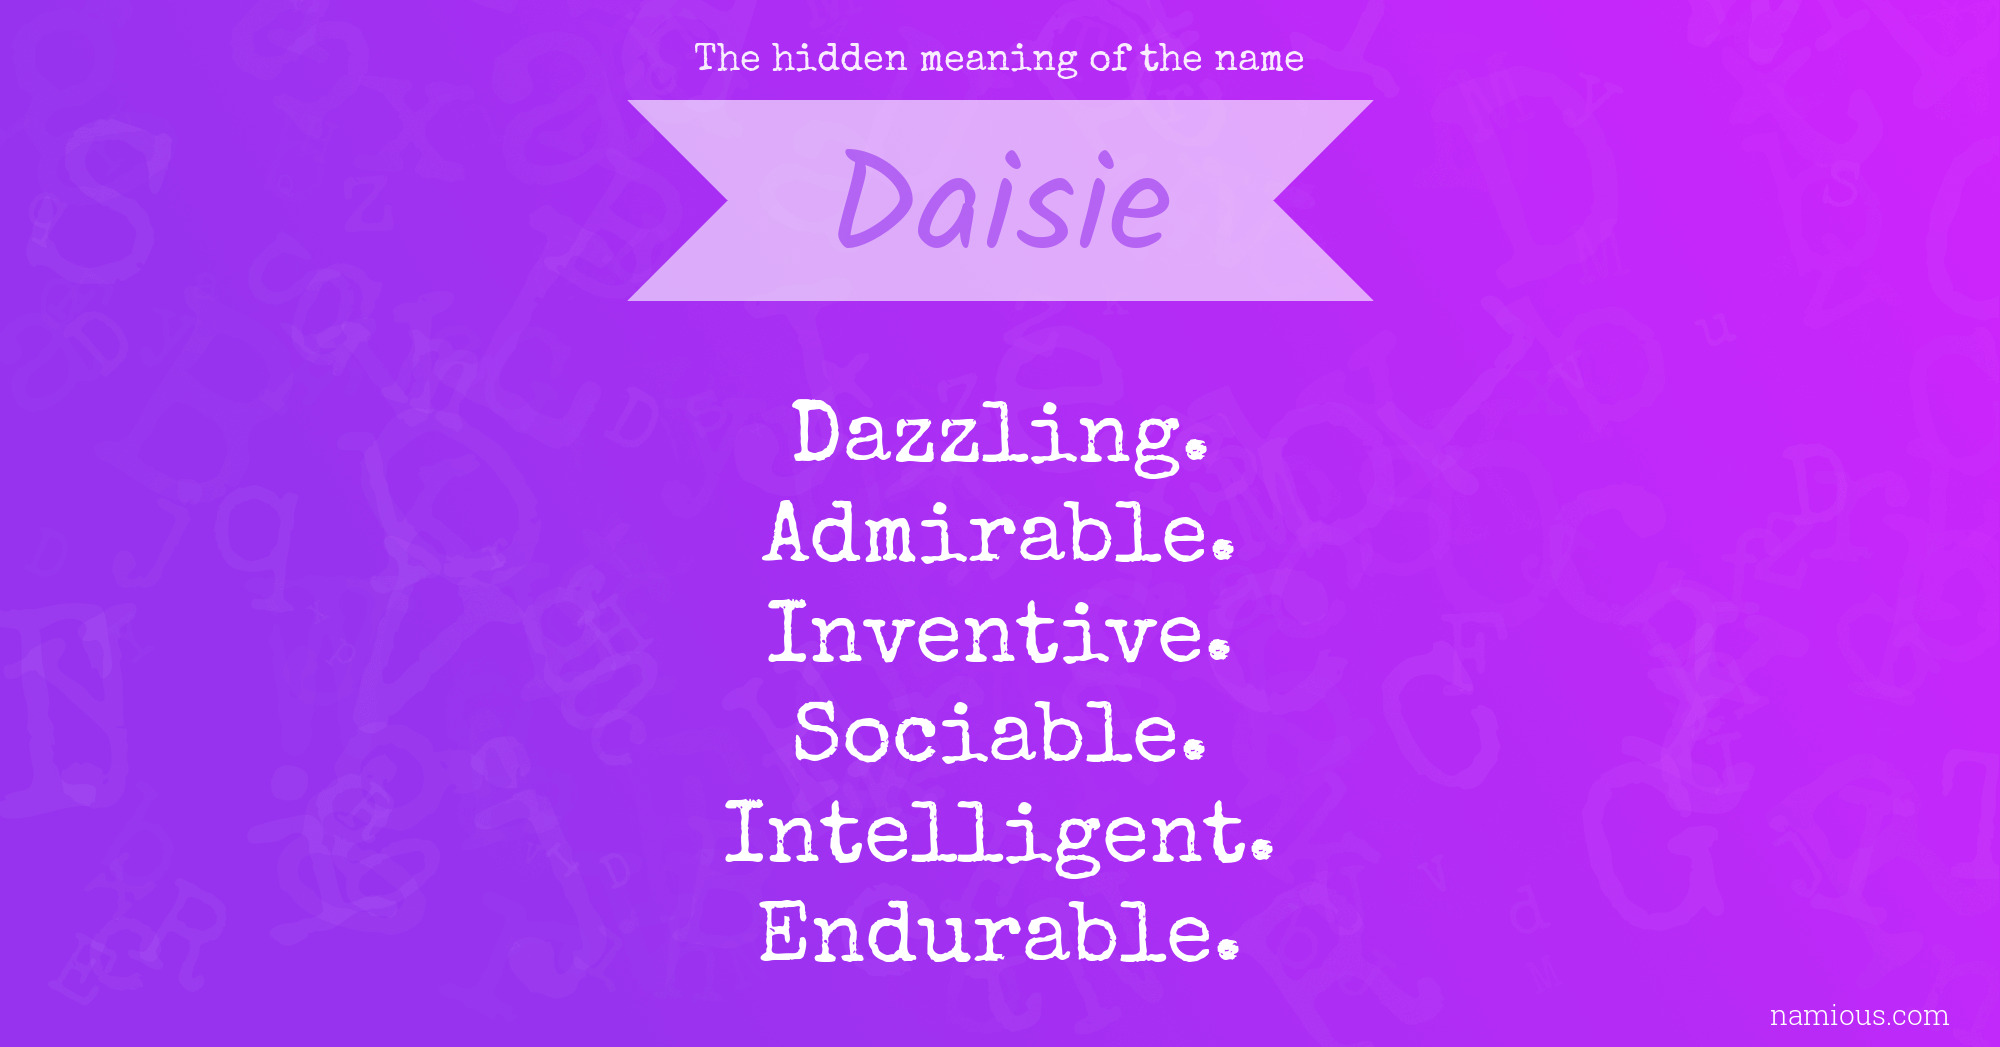 The hidden meaning of the name Daisie